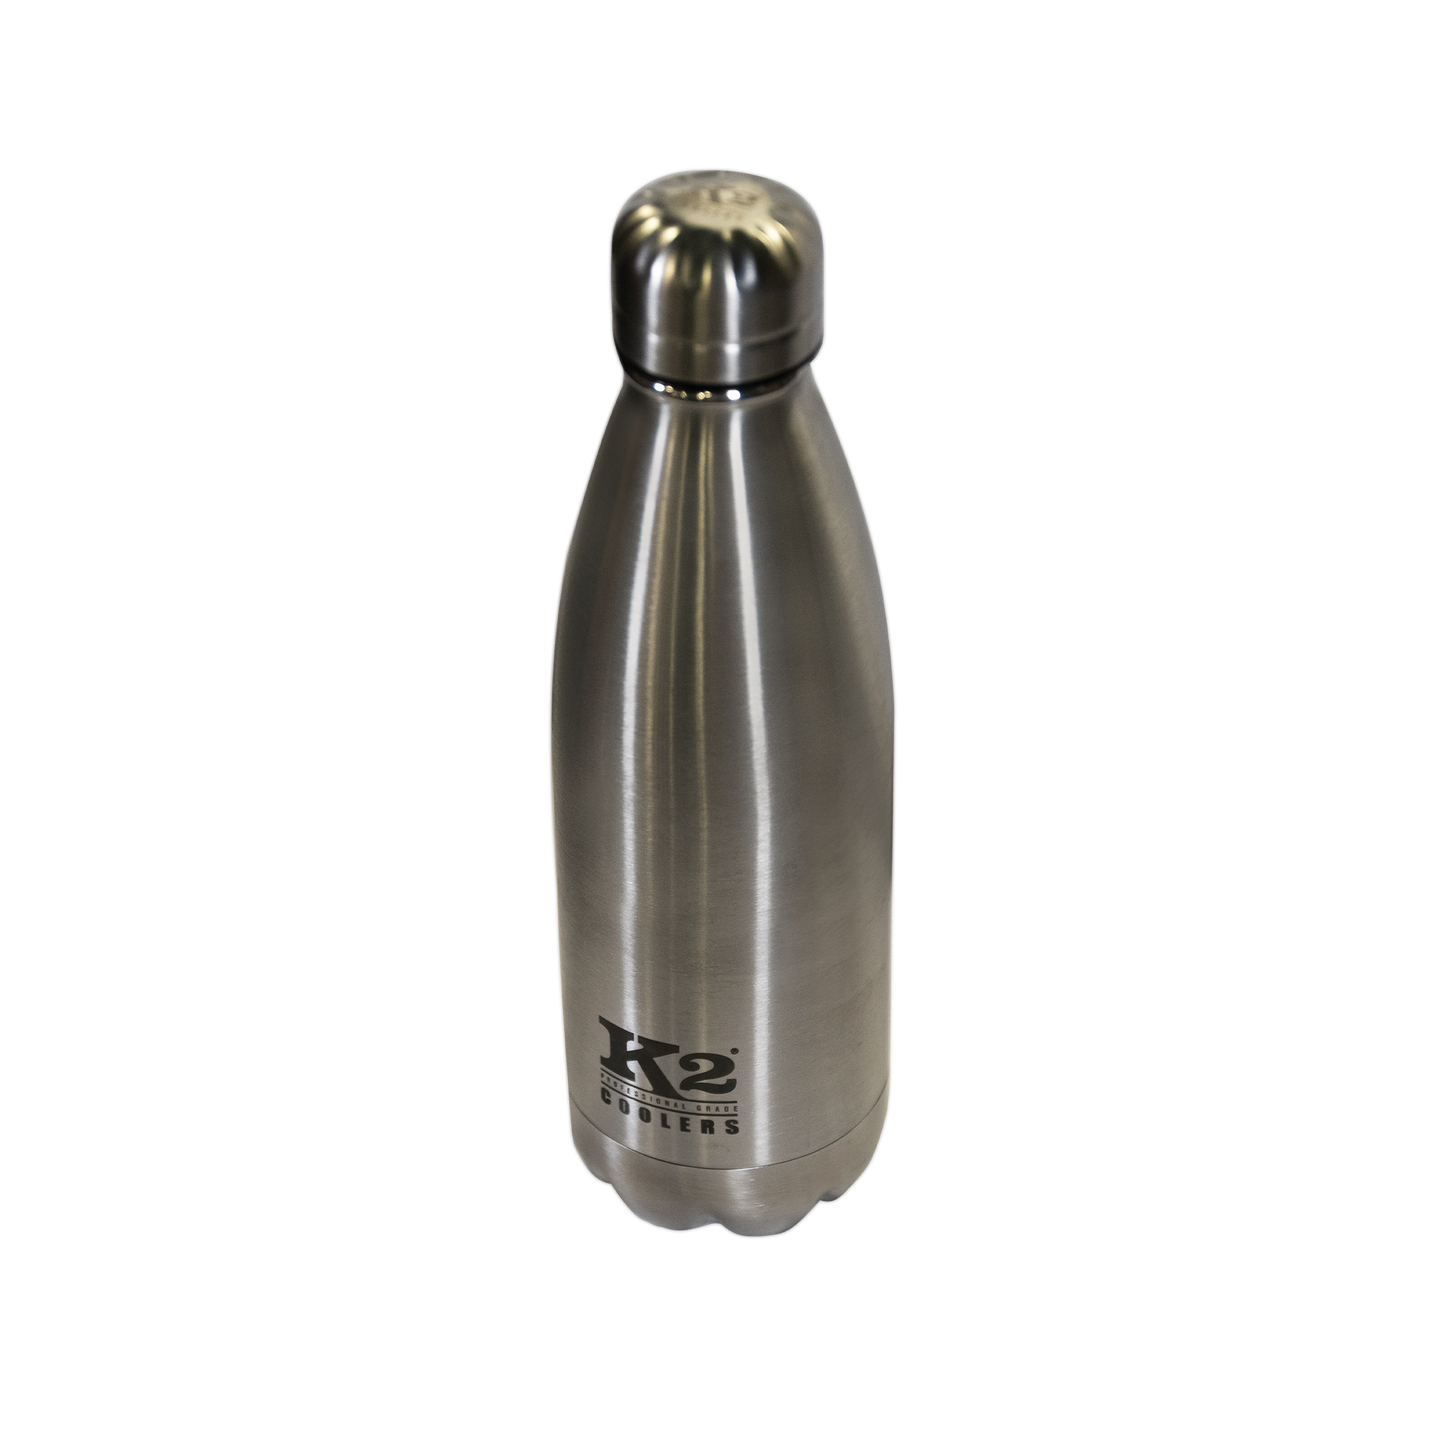 Element Bottle by K2Coolers